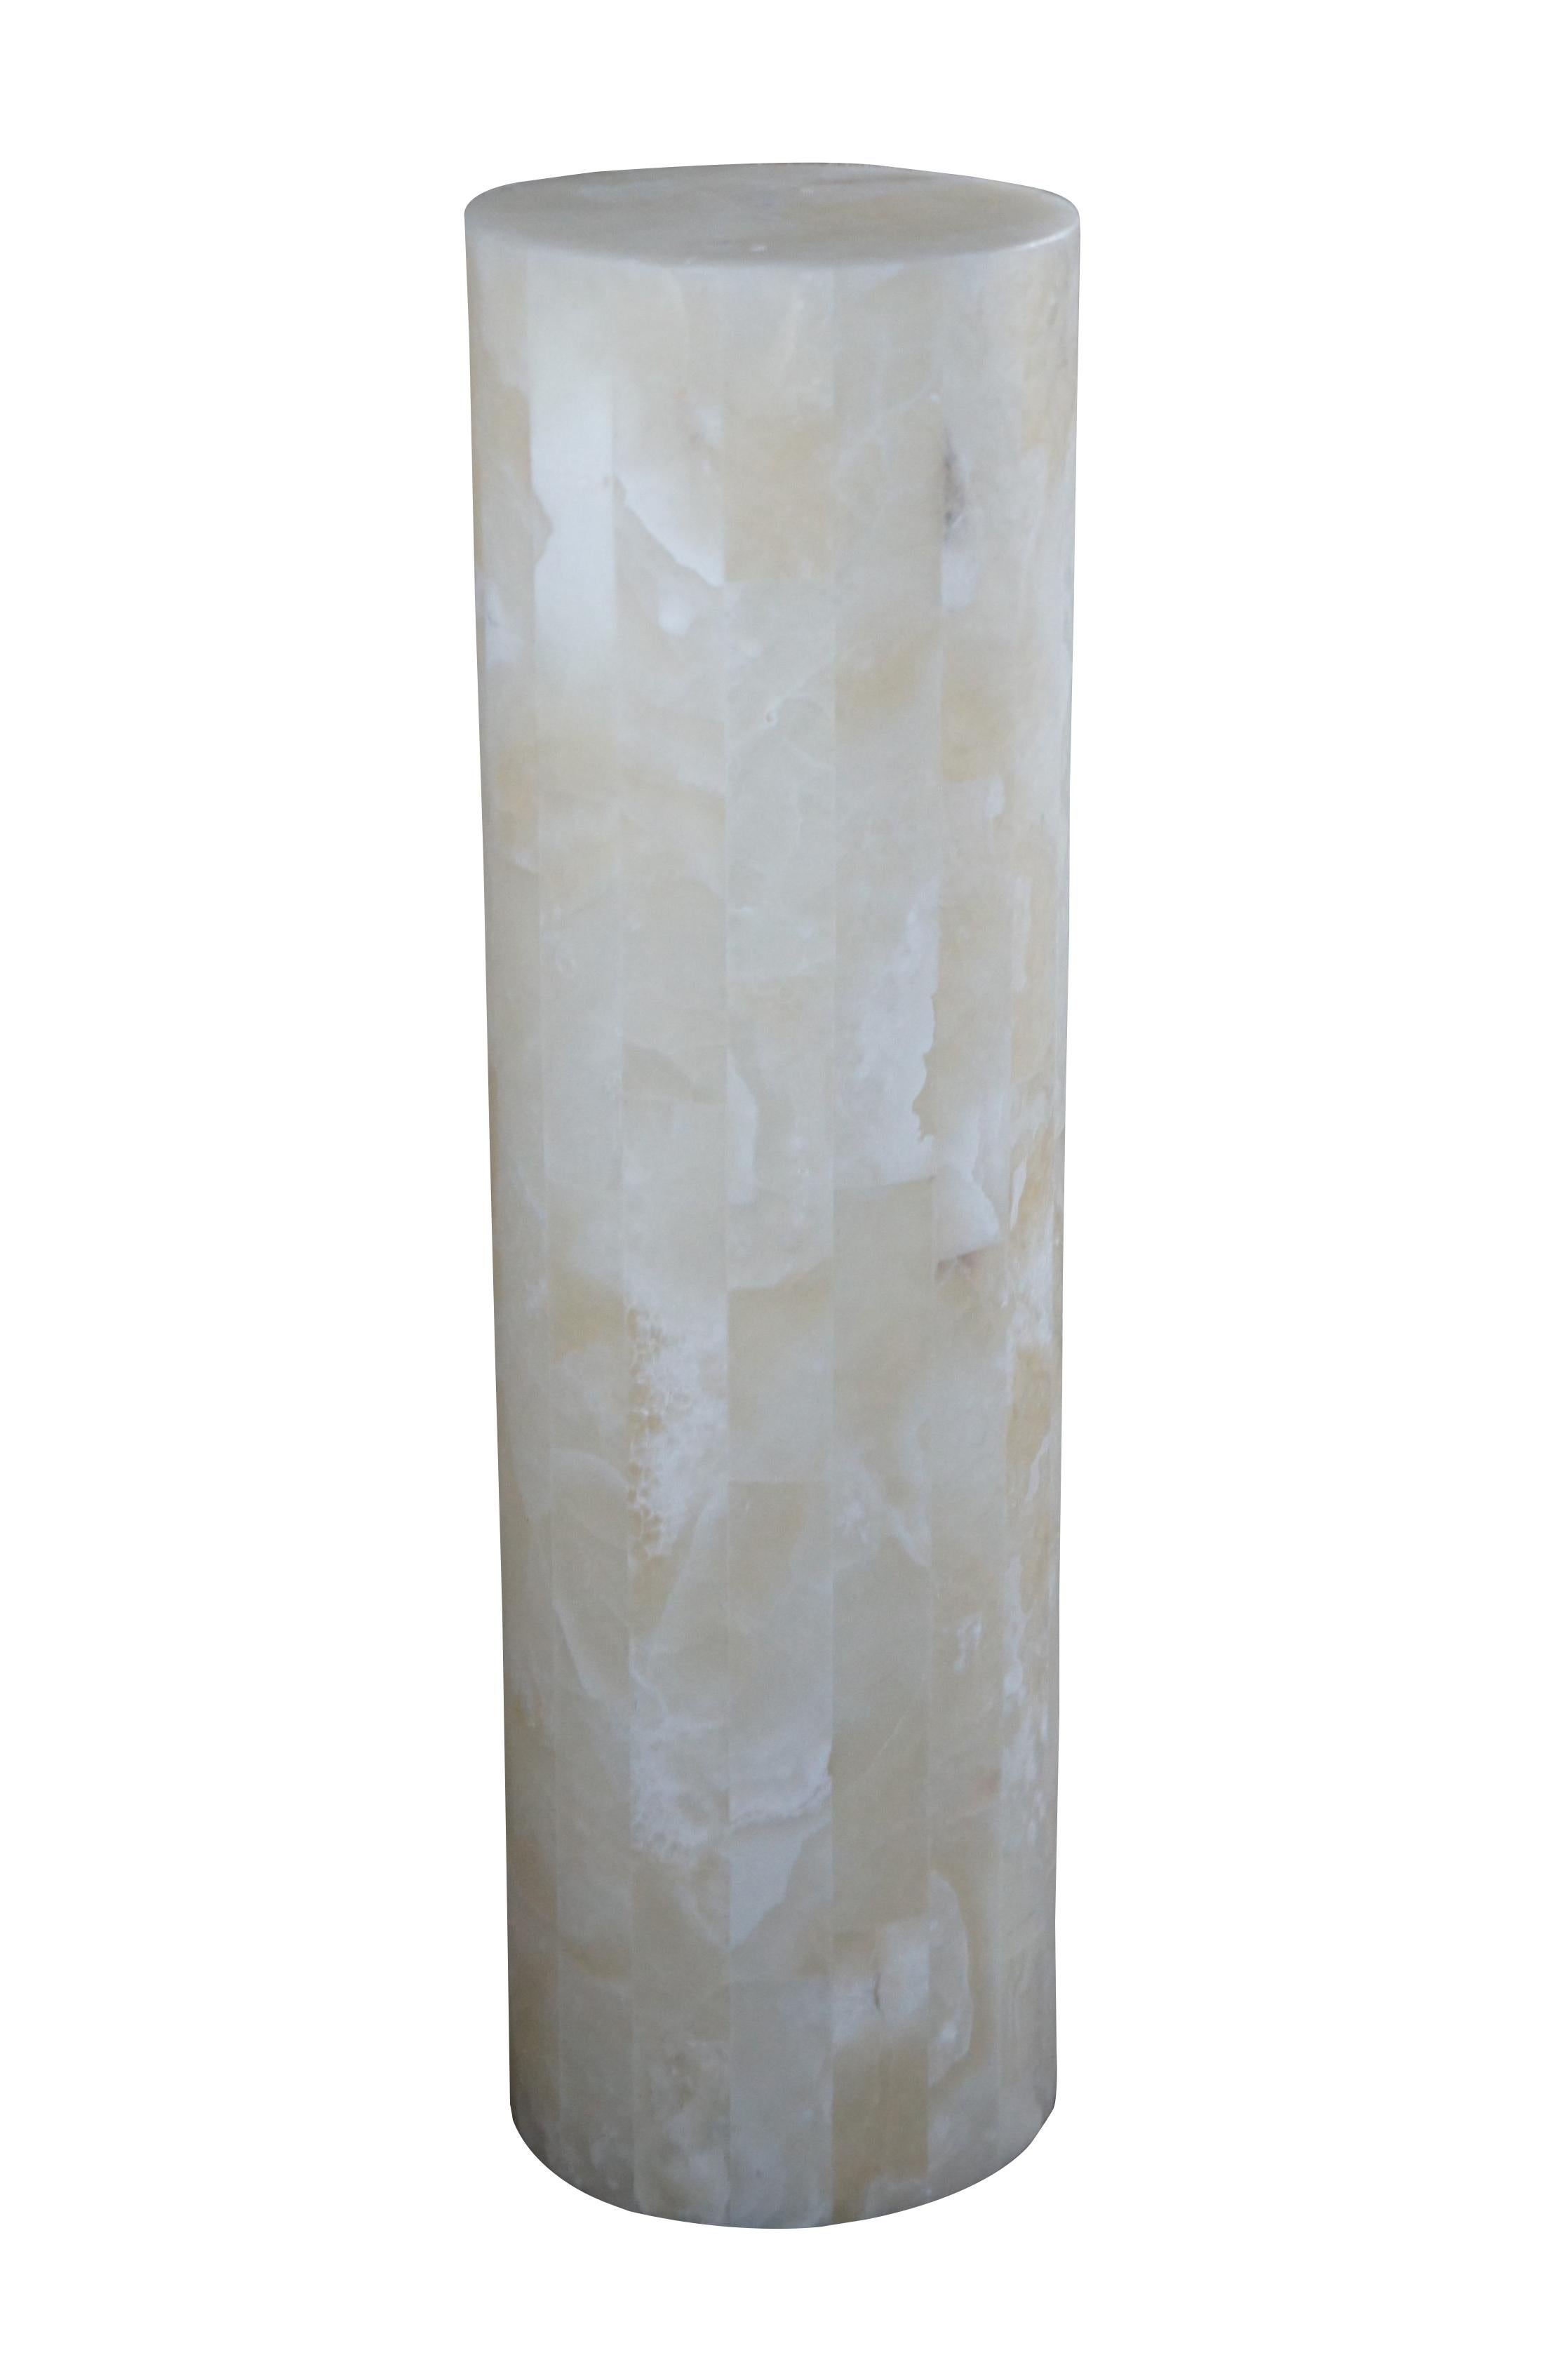 A stunning tessellated onyx illuminated column or floor lamp.  Cylindrical form that is perfect for the display of a sculpture or as a stand alone.  Features two bulbs on the inside that bring about a bright mesmerizing glow.

Dimensions: 
11.5